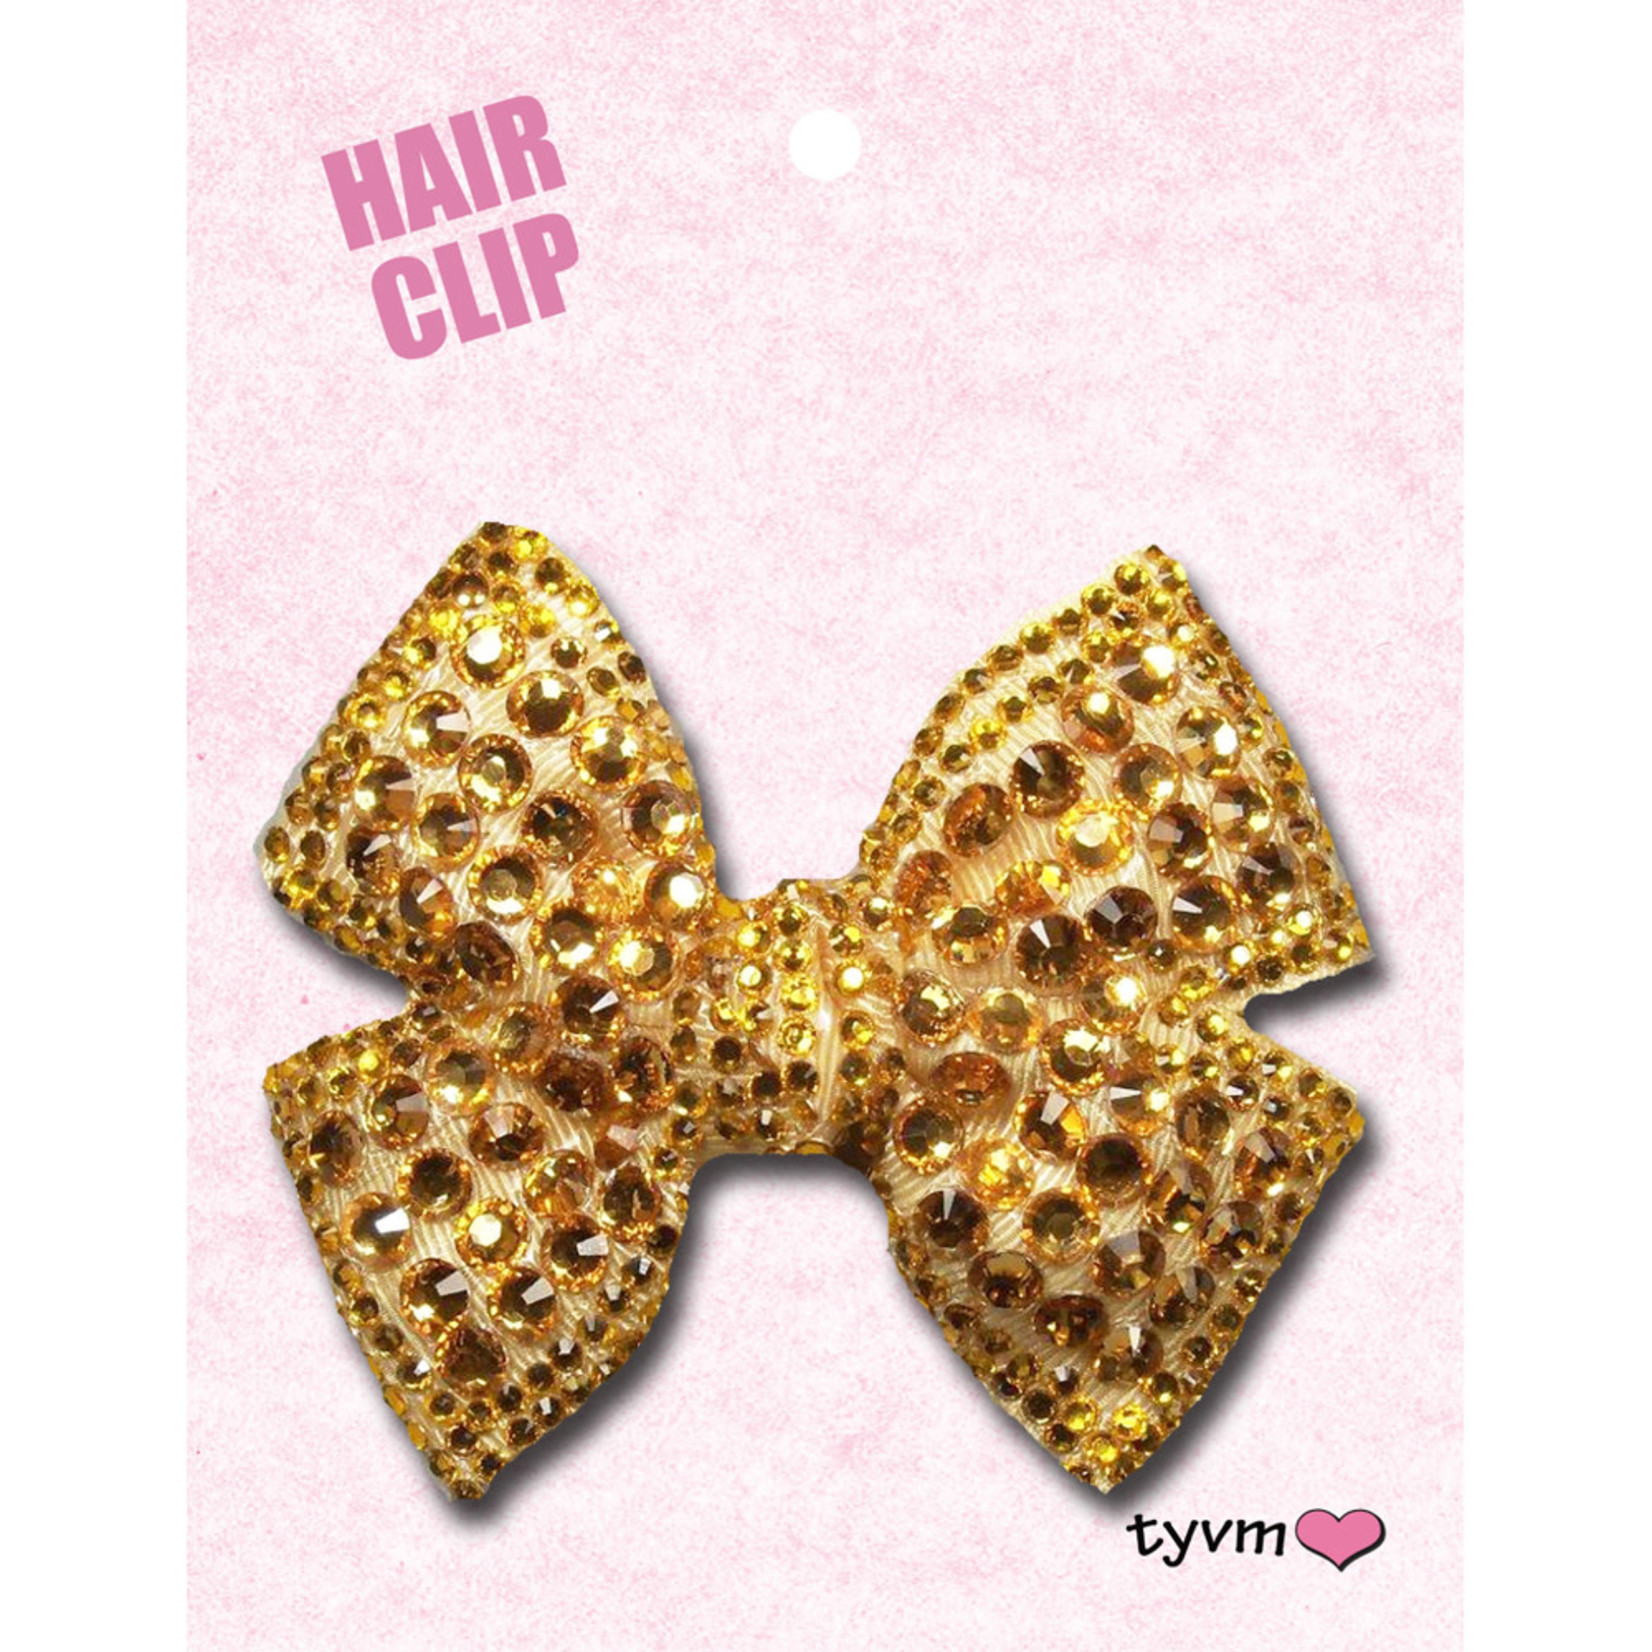 tyvm 49522 Crystalized Hair Bows